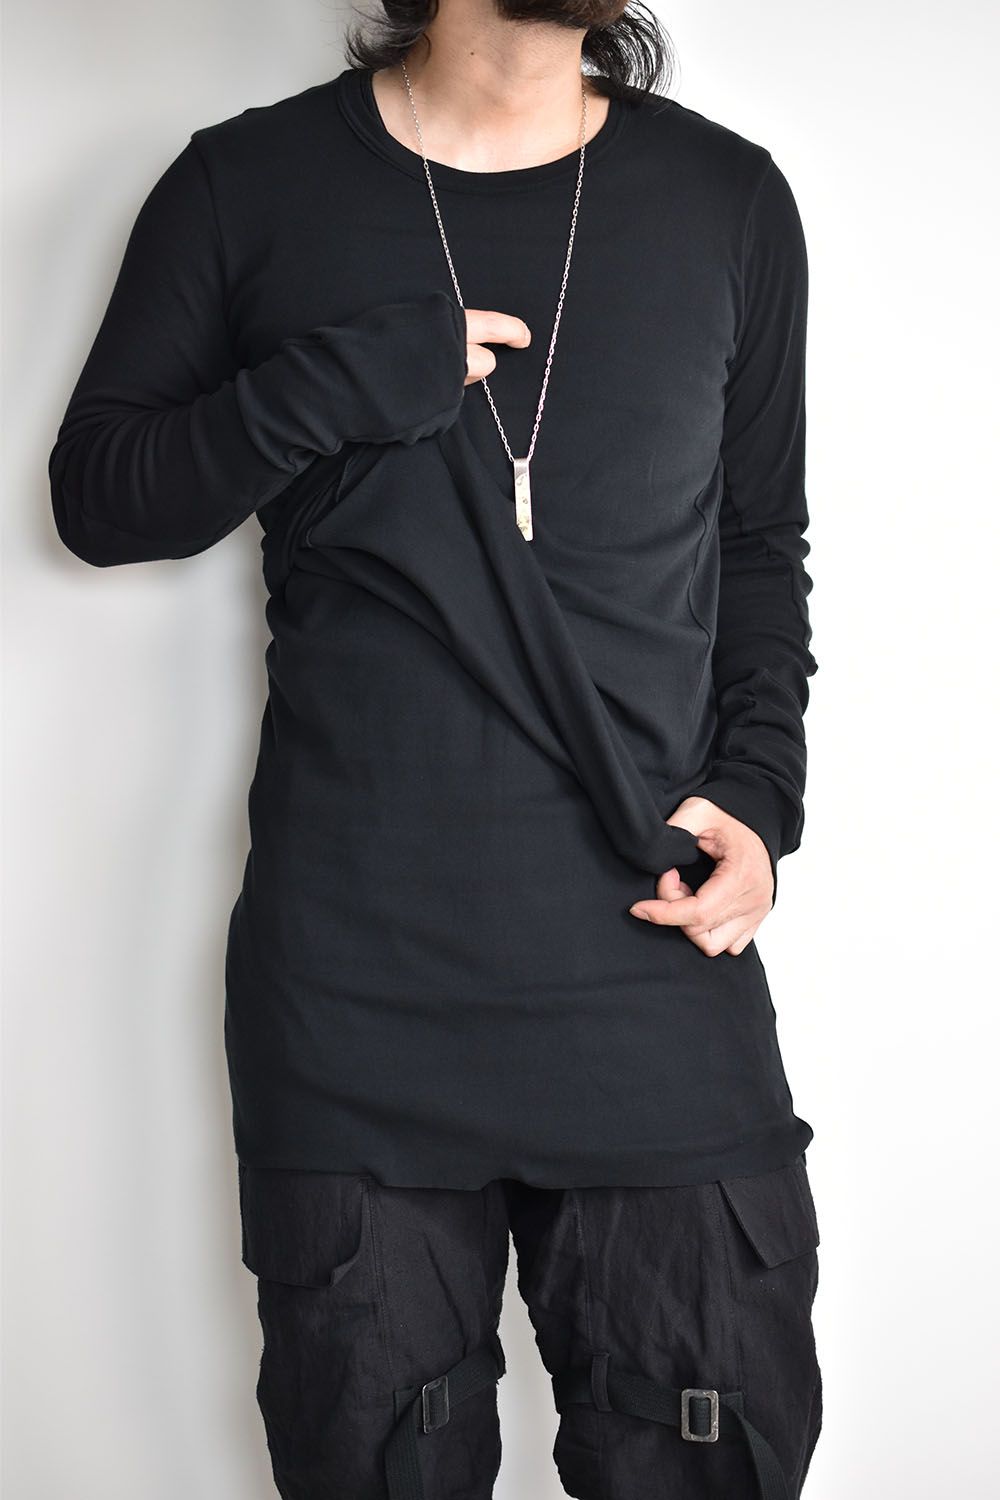 Double Layered Long Top"Black"/ダブルレイヤードロングトップ"ブラック"